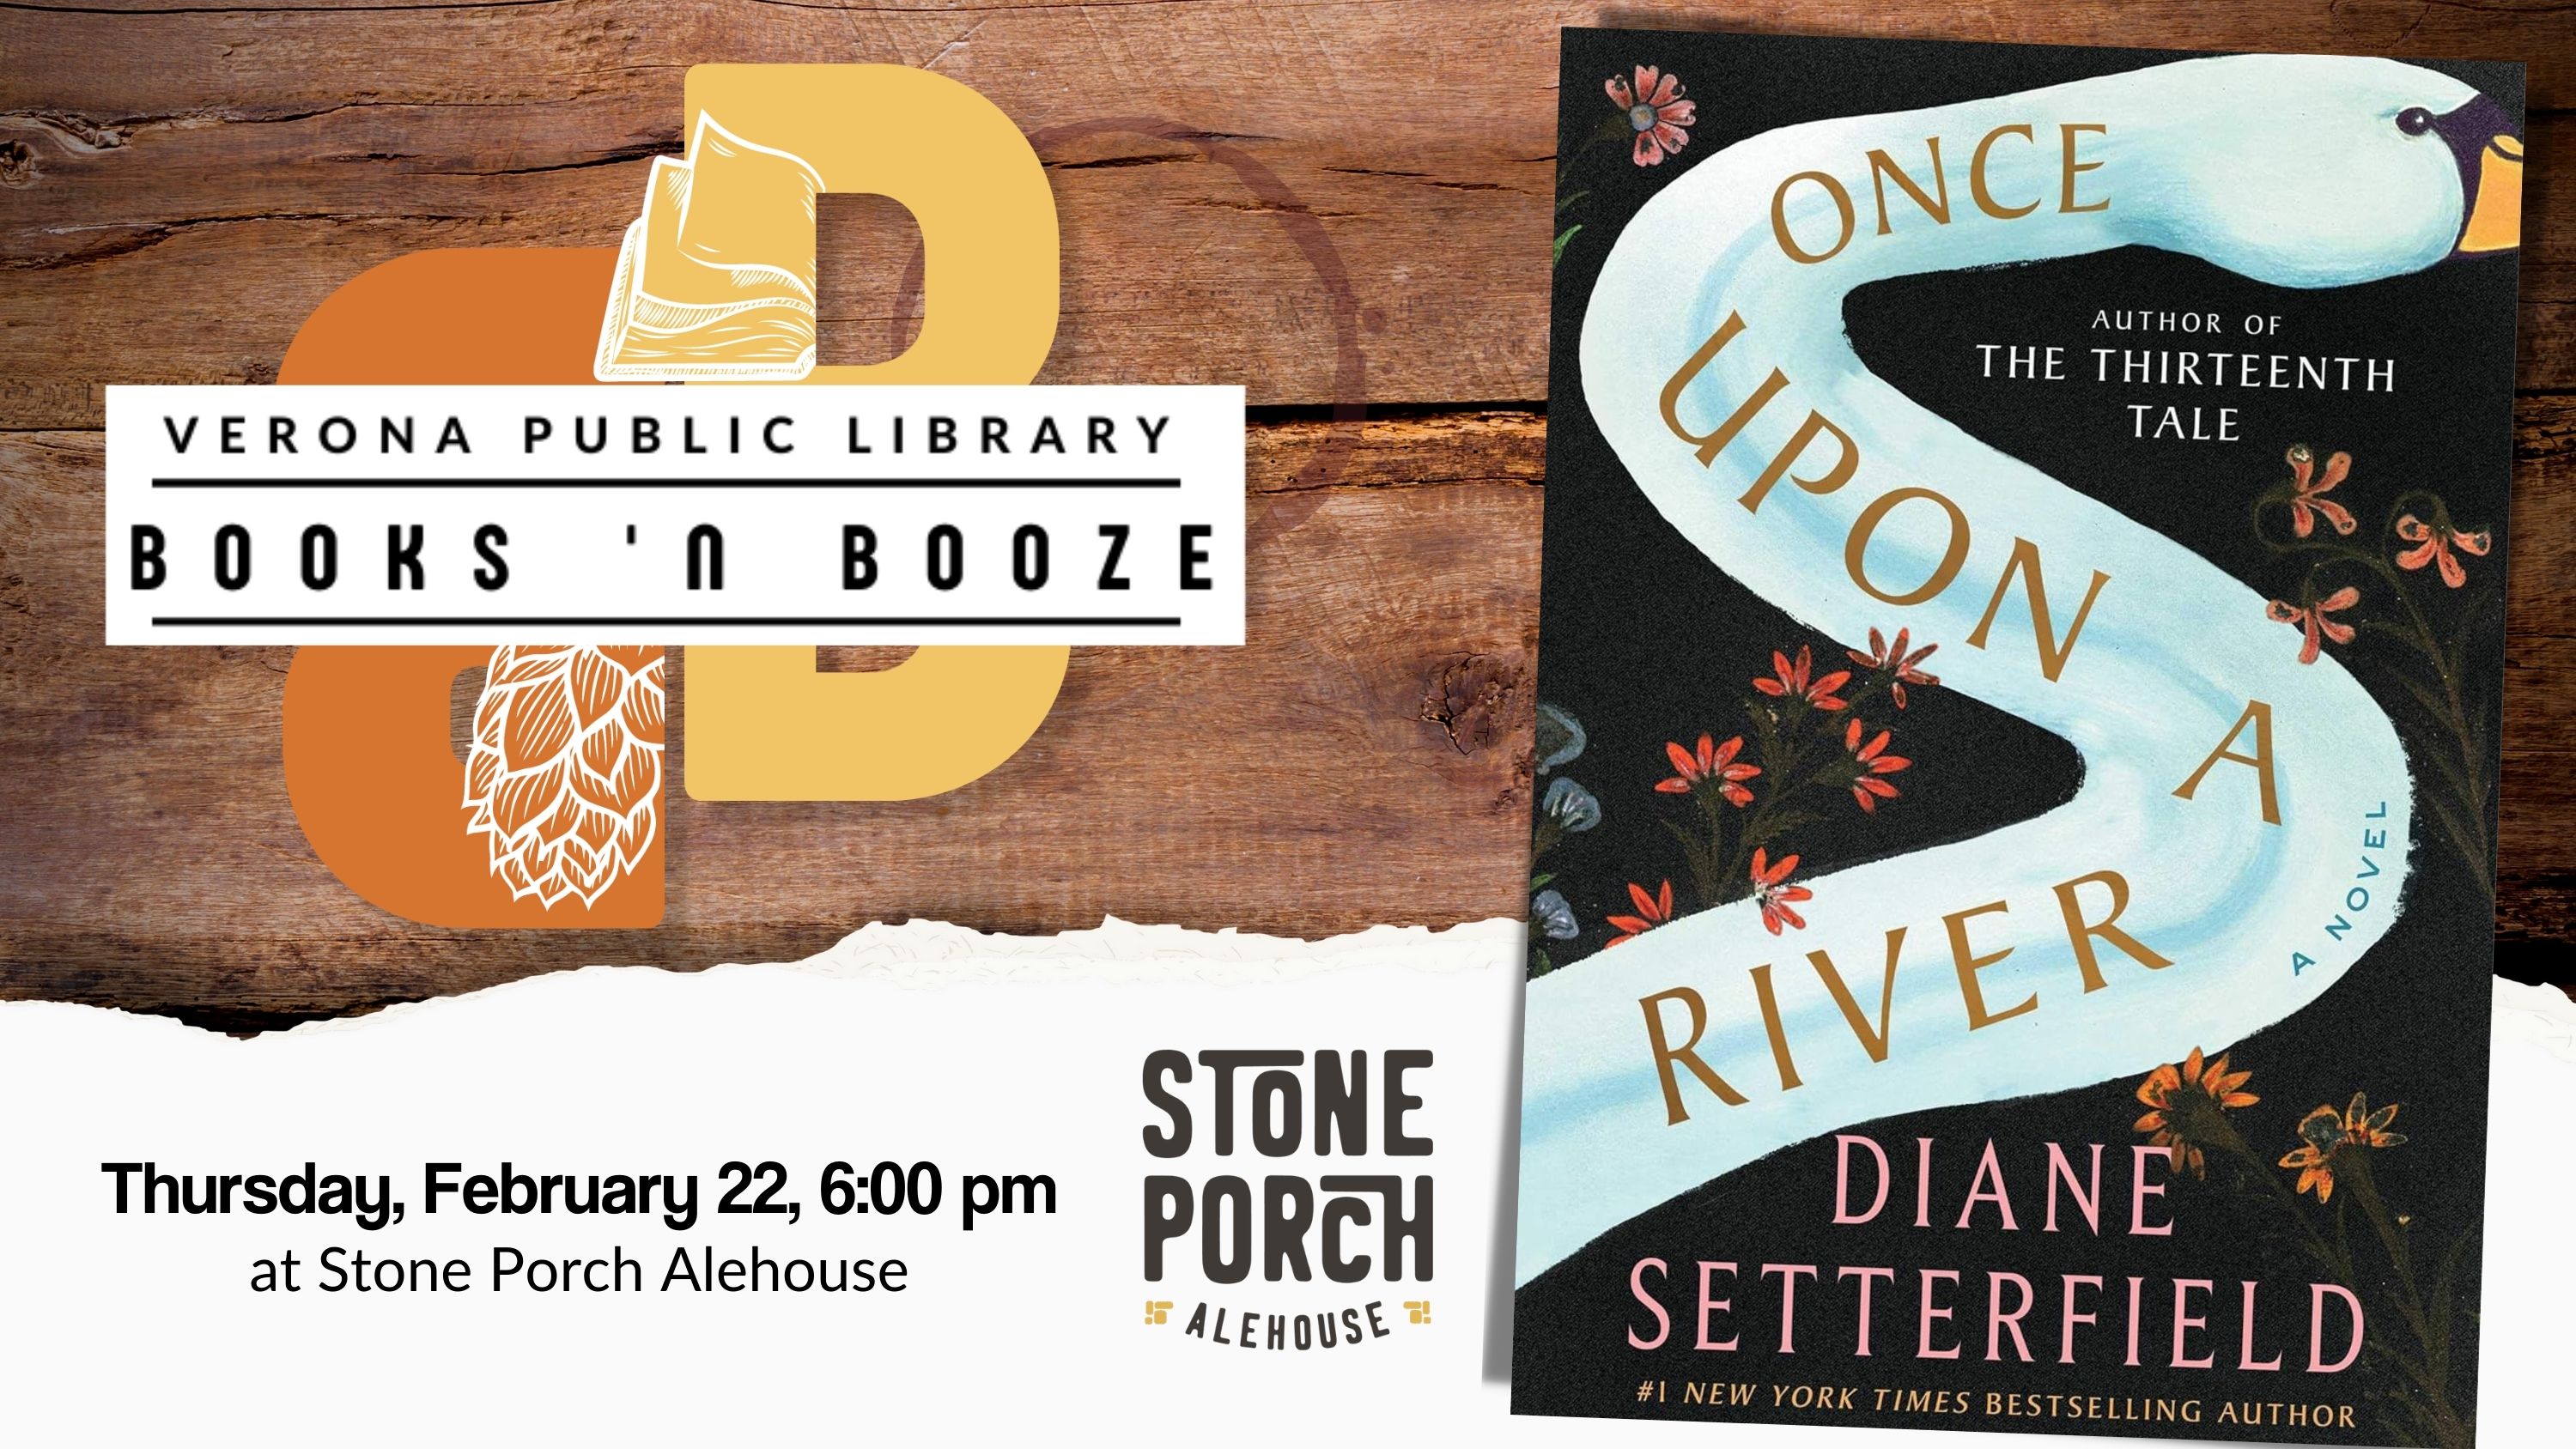 "Once Upon a River" book cover with Books 'n Booze and Stone Porch Alehouse logos